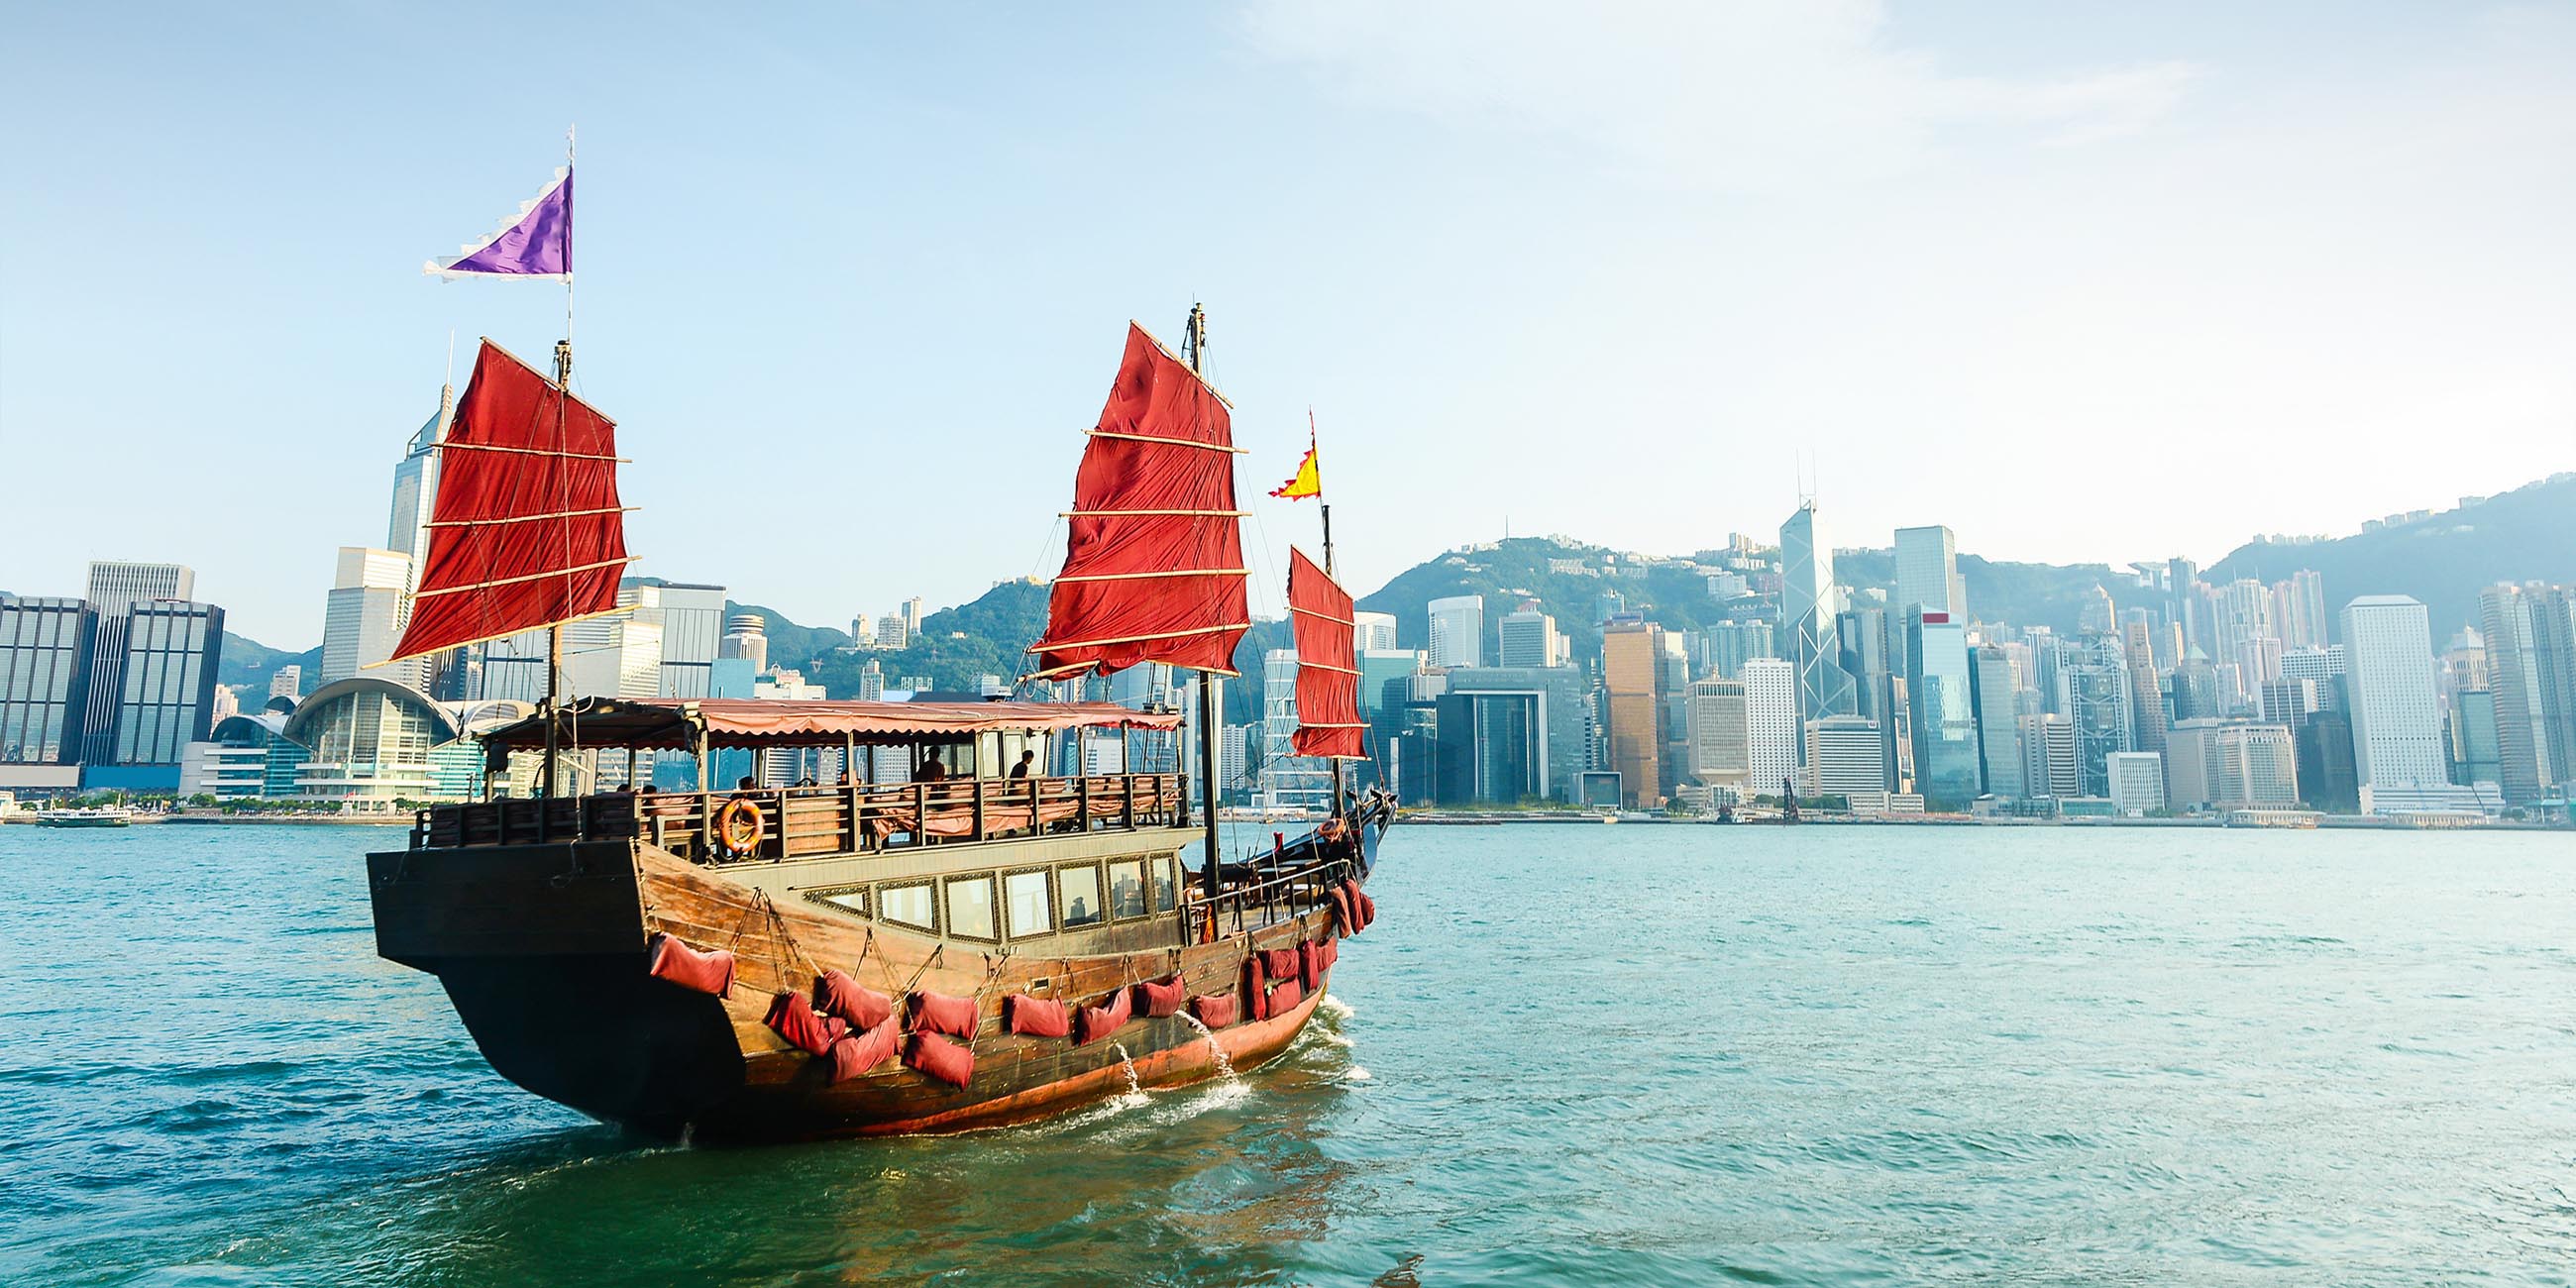 hong kong trip packages from india